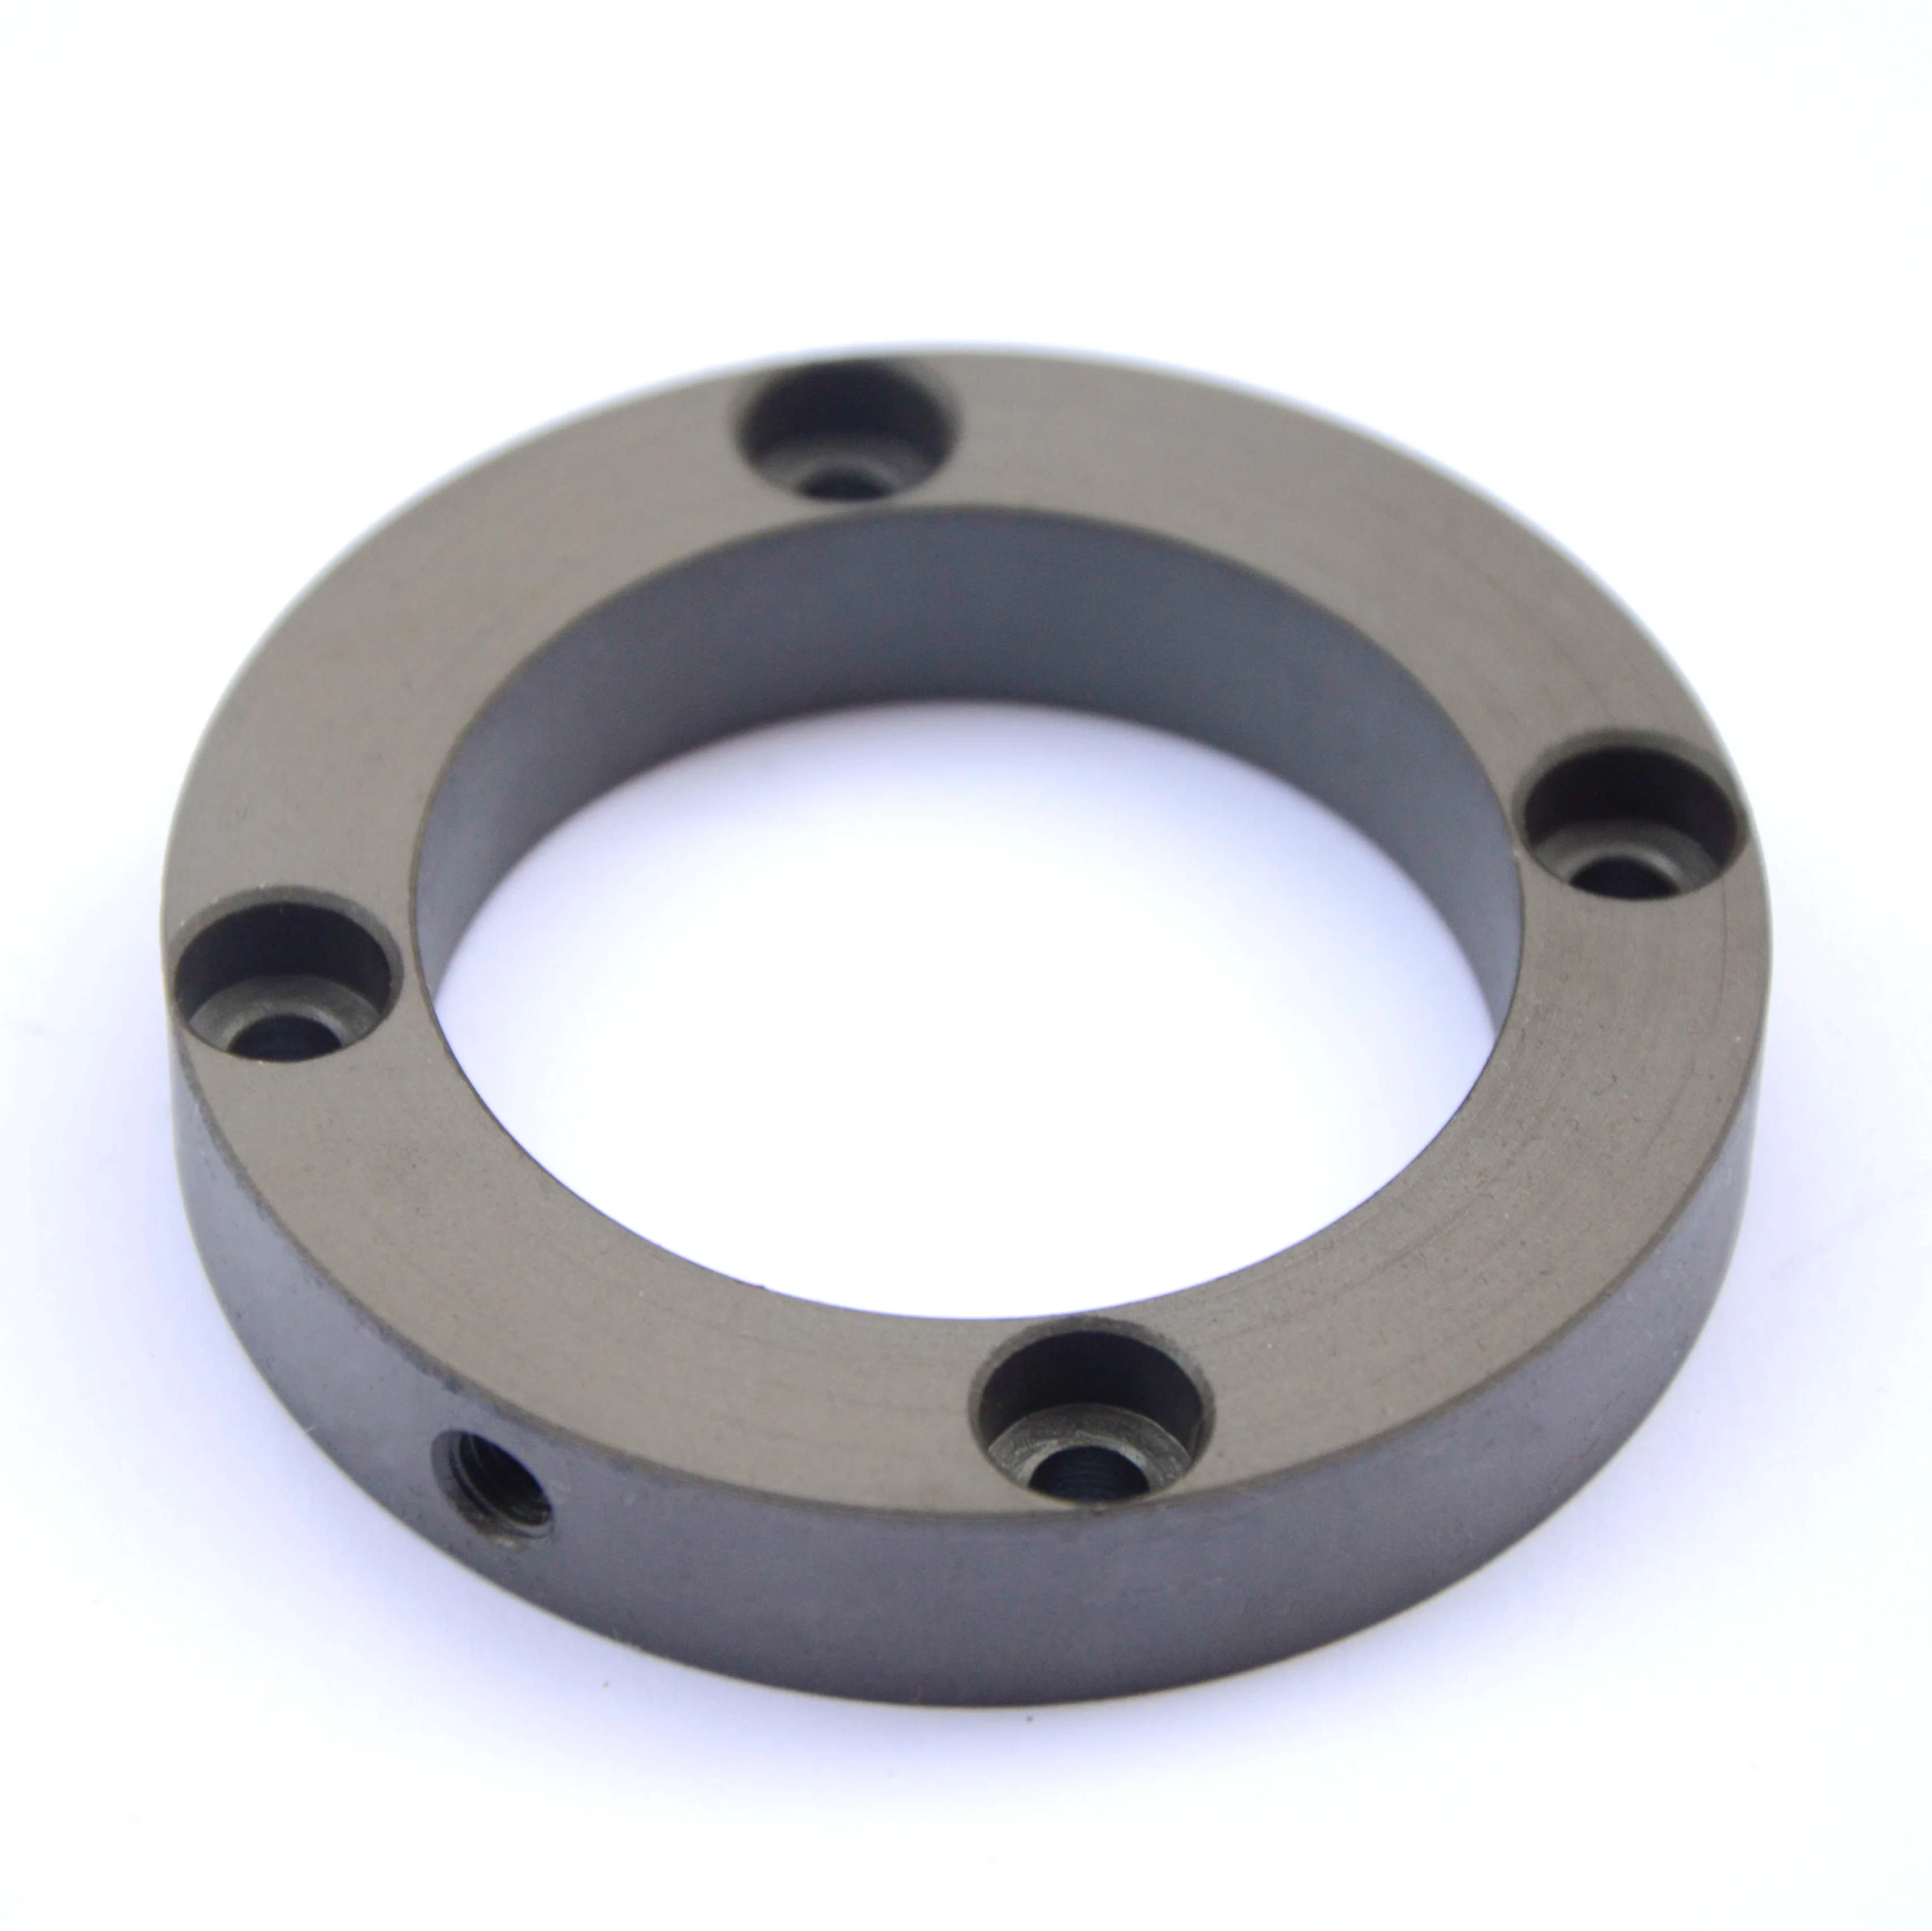 Mechanical Precision/Custom/Metal Processing/Turning/Anodizing/Milling Machine/Turning/Milling Machine/CNC Bending Aluminum Part/Material Steel Brass Alloy